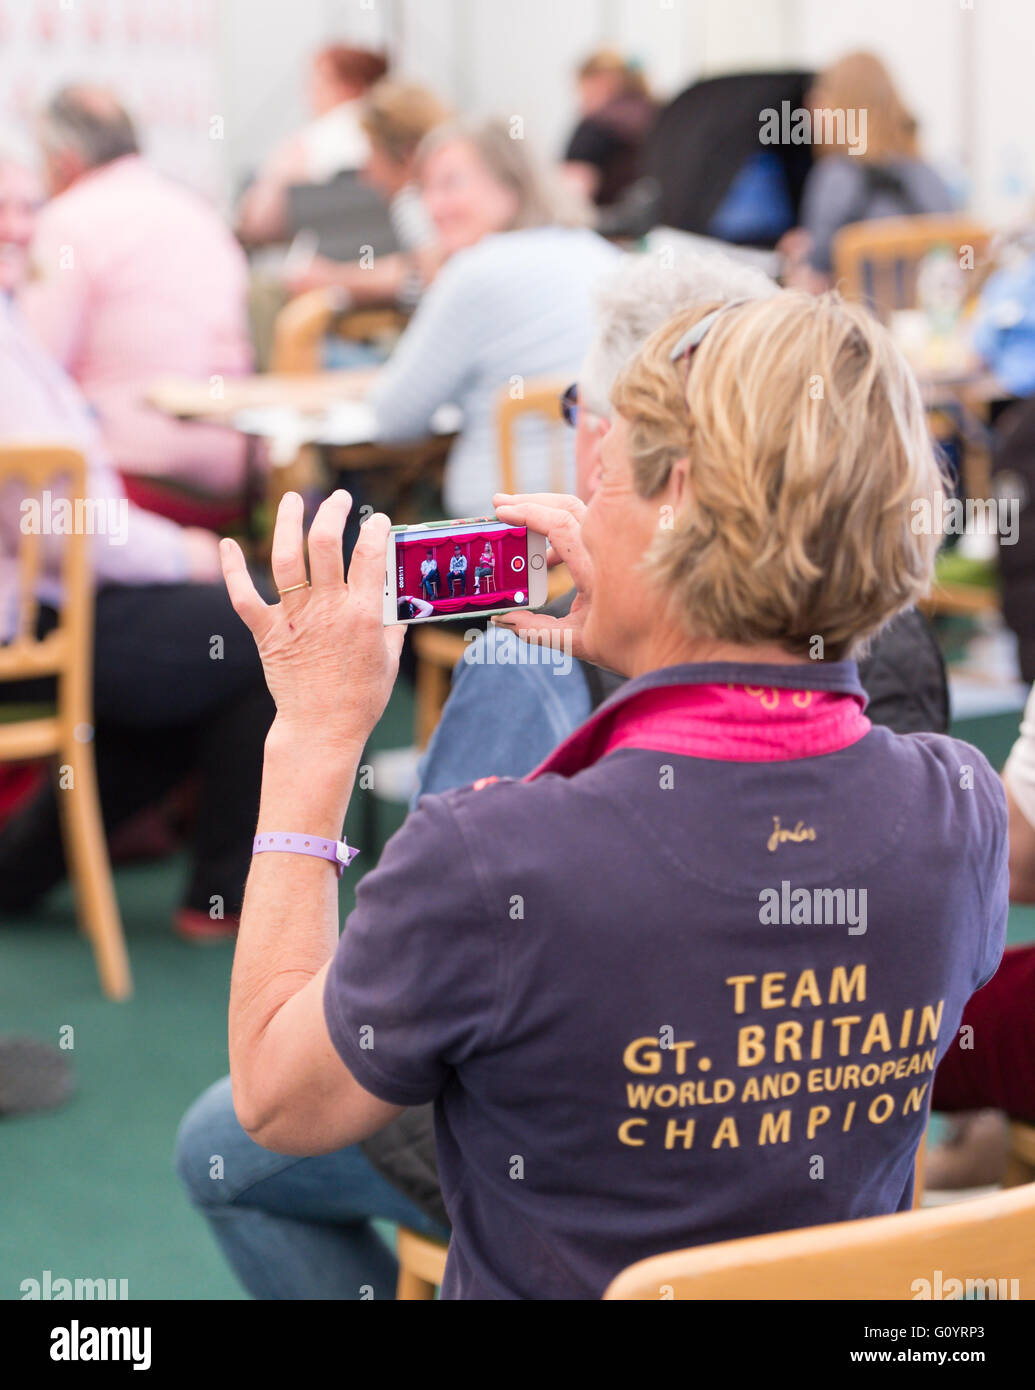 Badminton, South Gloucestershire, UK,  6th May 2016, Mary King filmes her Daughter Emily King at the press conference. Emily is in secomd place following the dressage phase of the Mitsubishi Motors Badminton Horse Trials 2016. Dressage is an advan. Credit: Trevor Holt / Alamy Live News Stock Photo